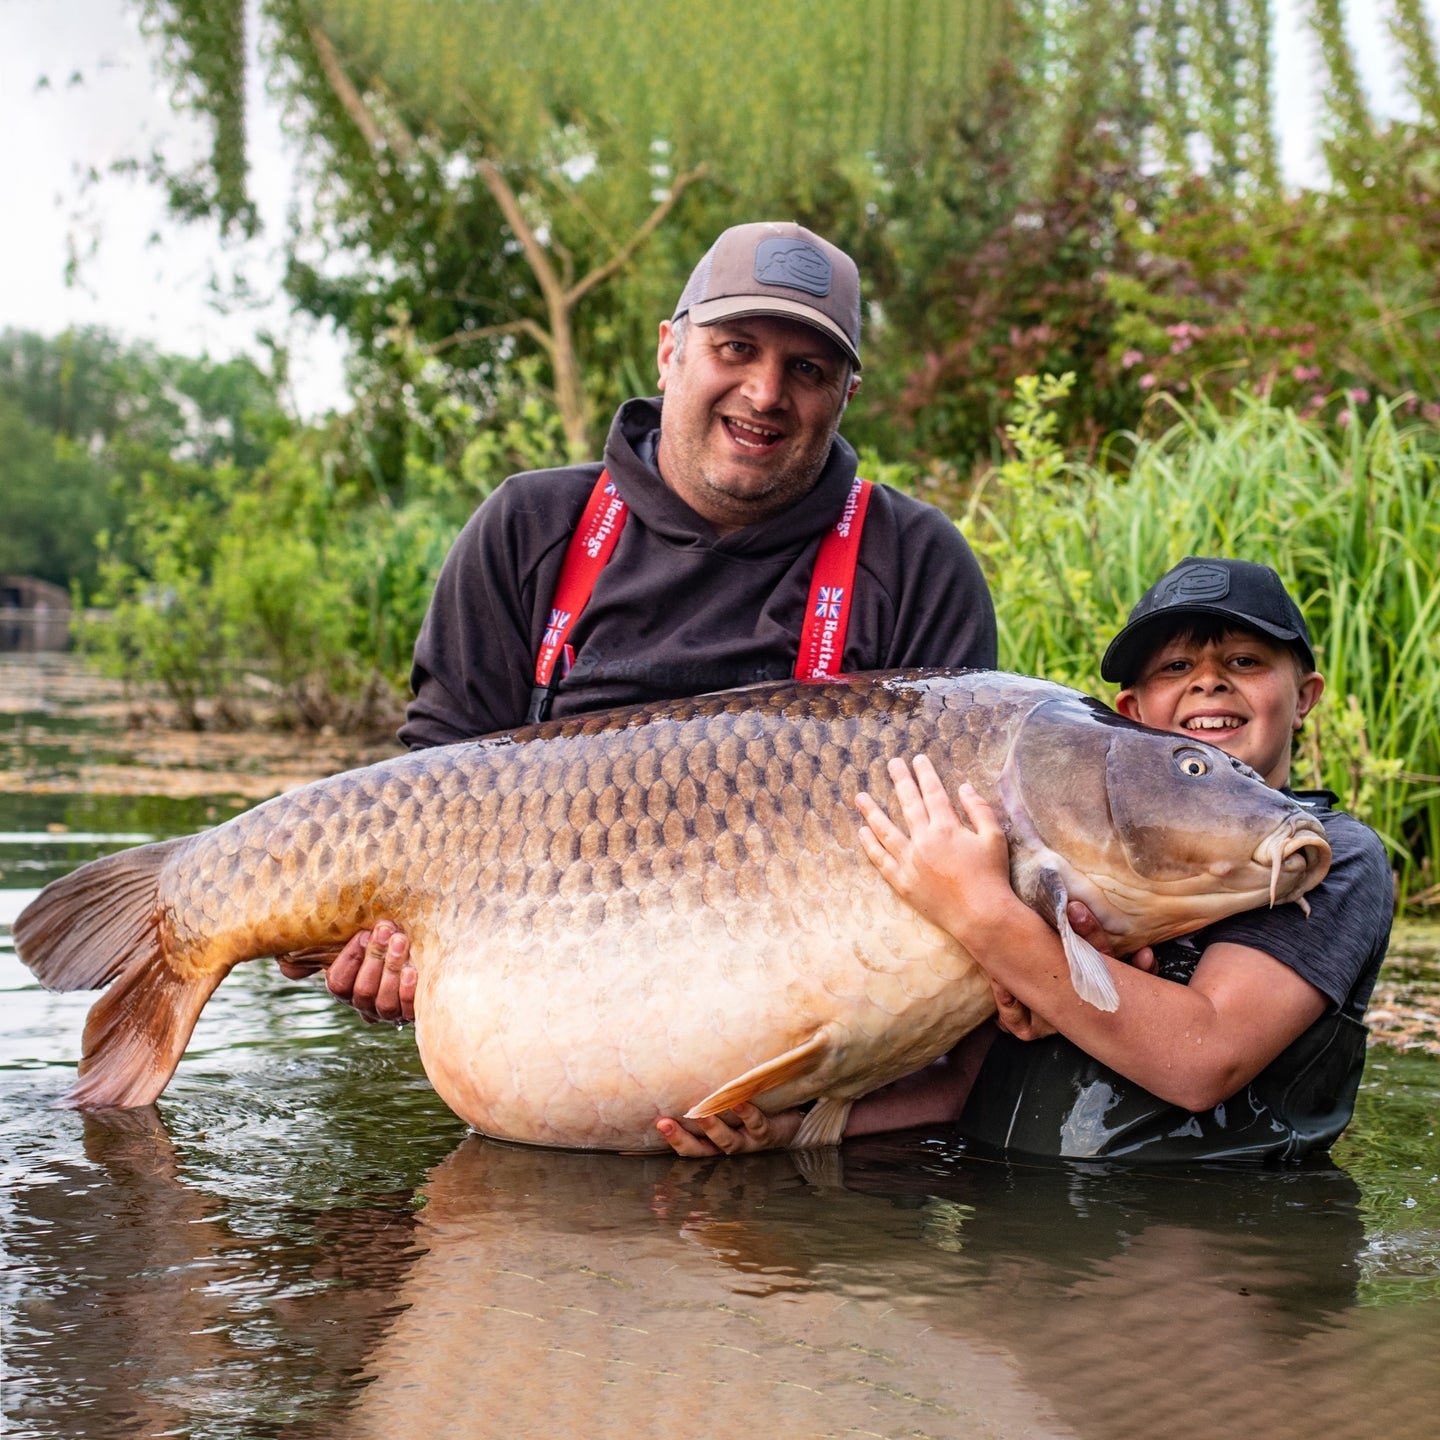 Watch: 11-Year-Old Boy Catches Giant 96-Pound Carp in France—One of Europe’s Biggest Confirmed Carp Catches on Record